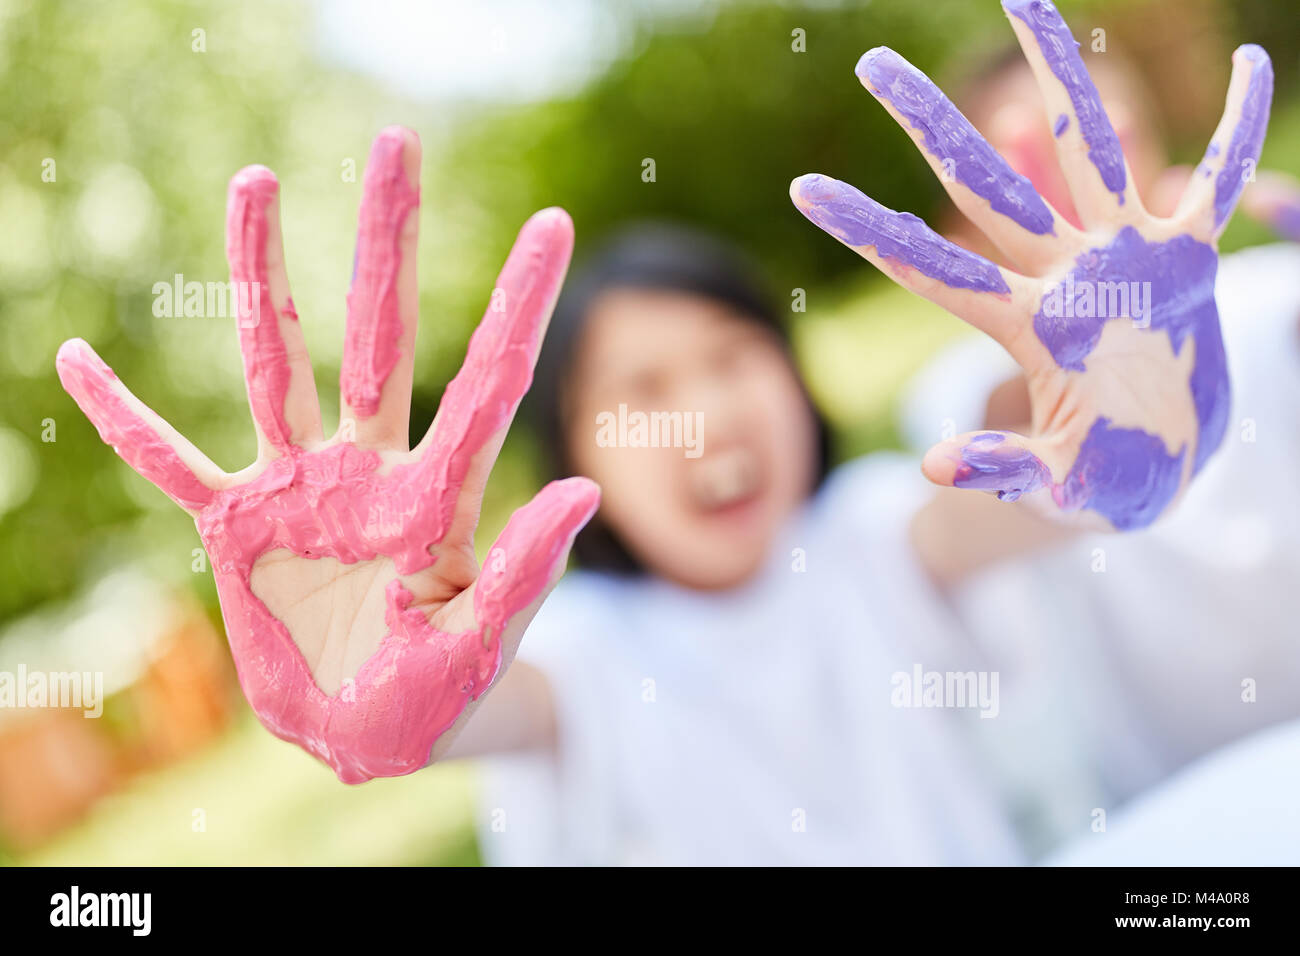 Child in preschool paints with finger paints and shows hands in purple and pink Stock Photo